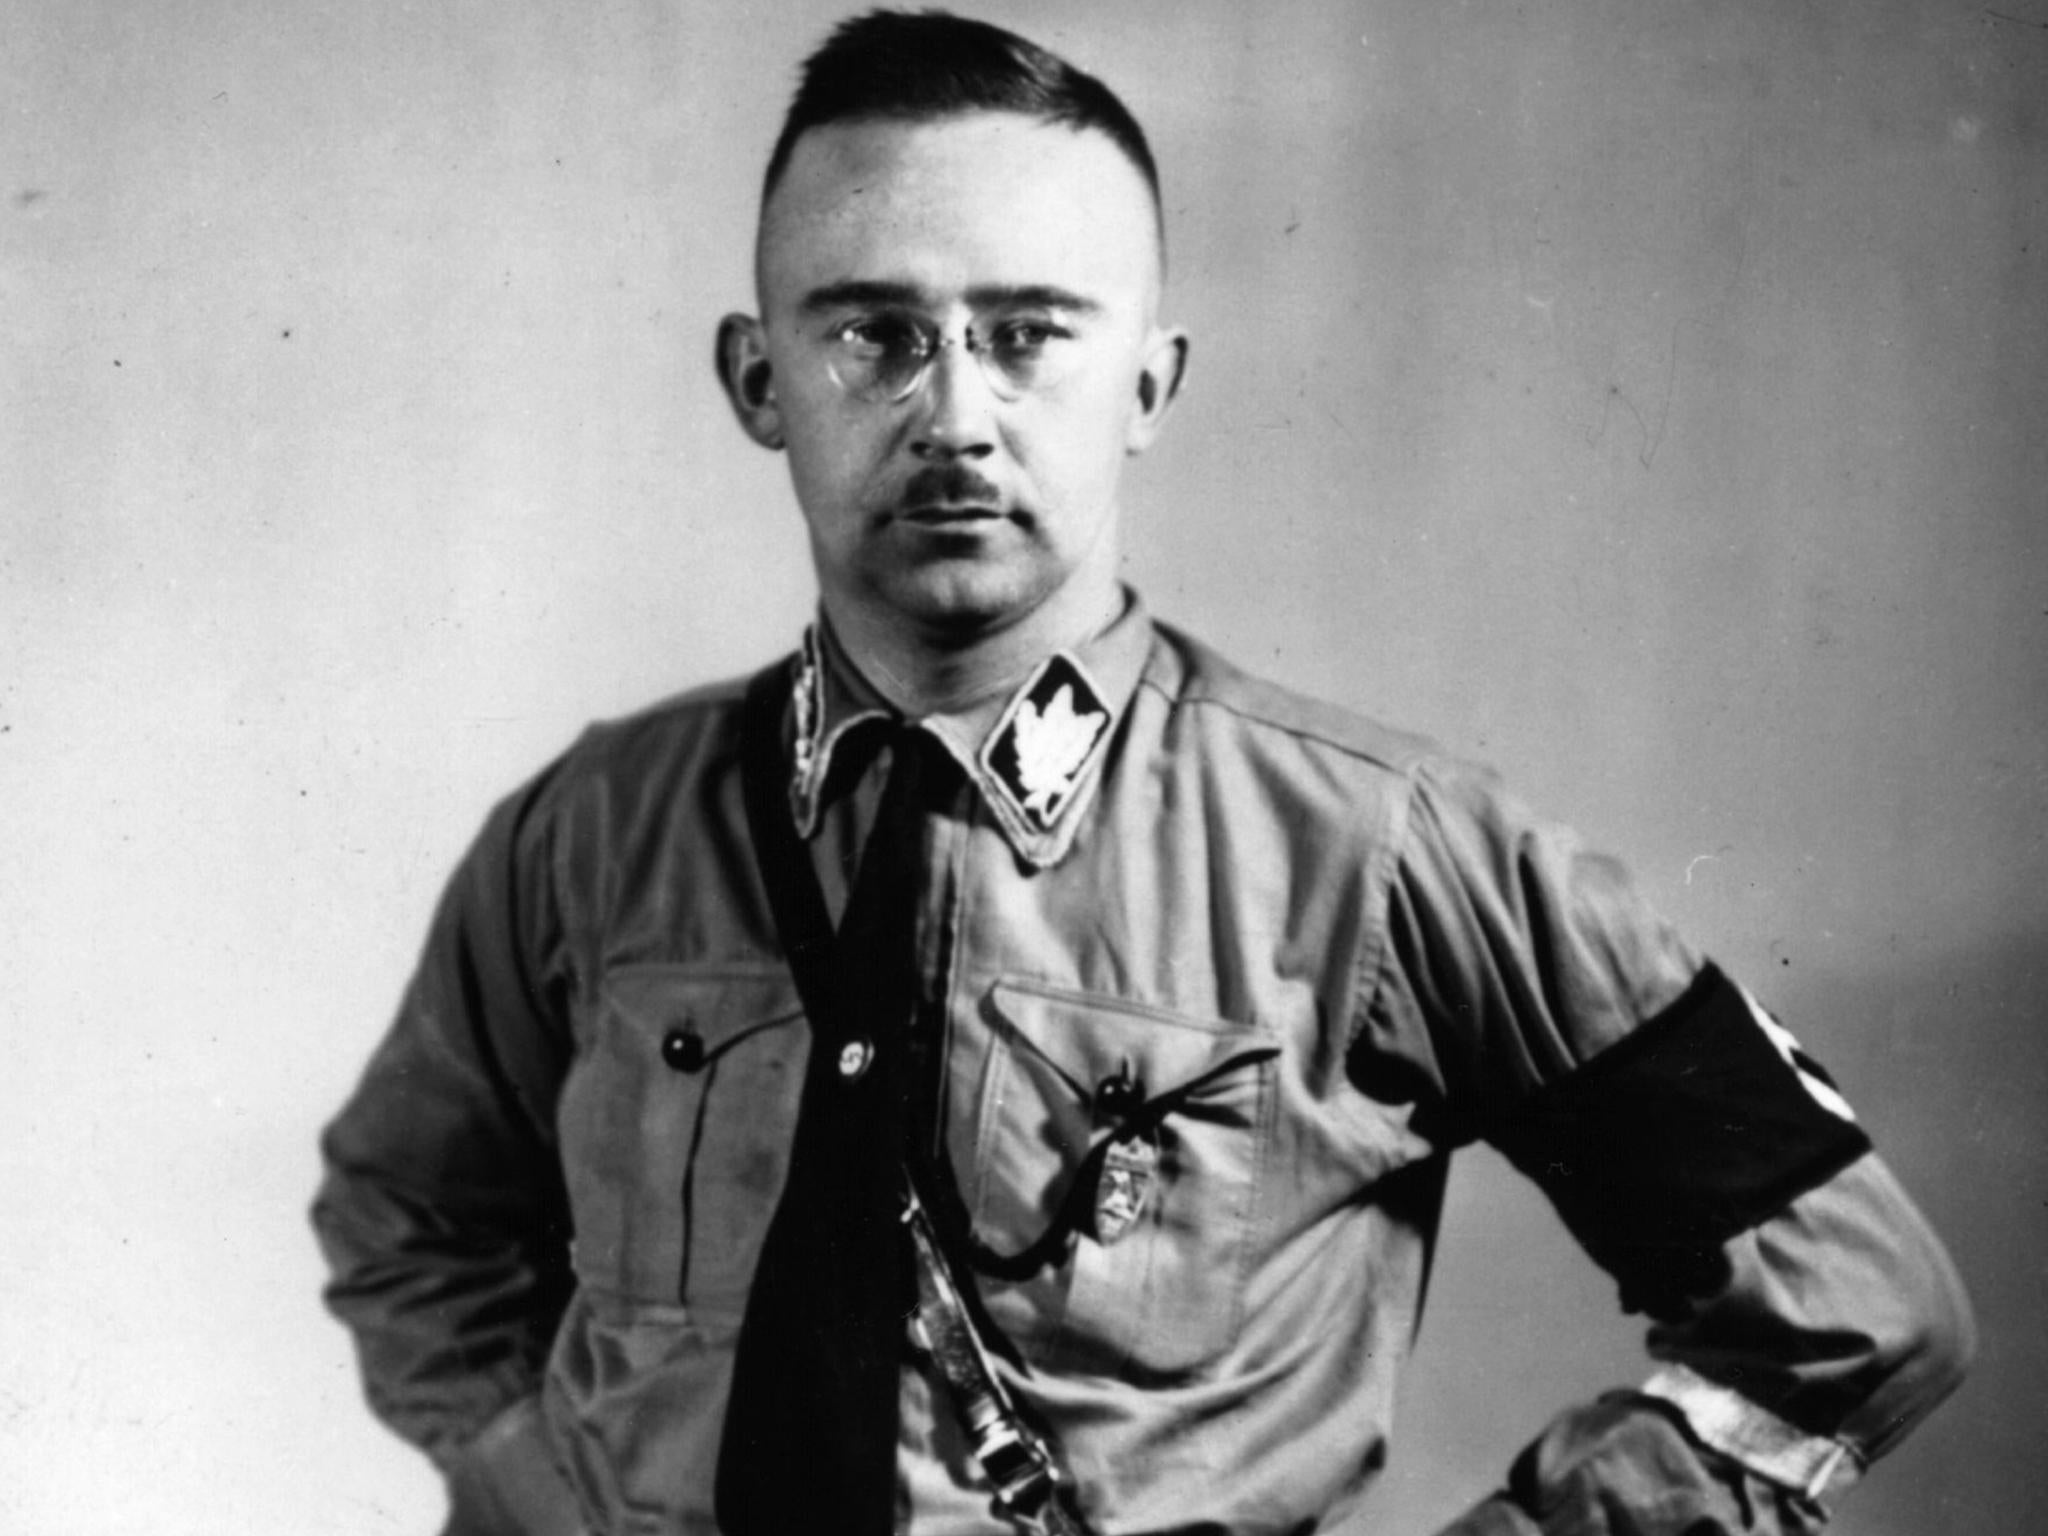 After being captured at the end of the Second World War, Heinrich Himmler killed himself before he could be put on trial (Getty)